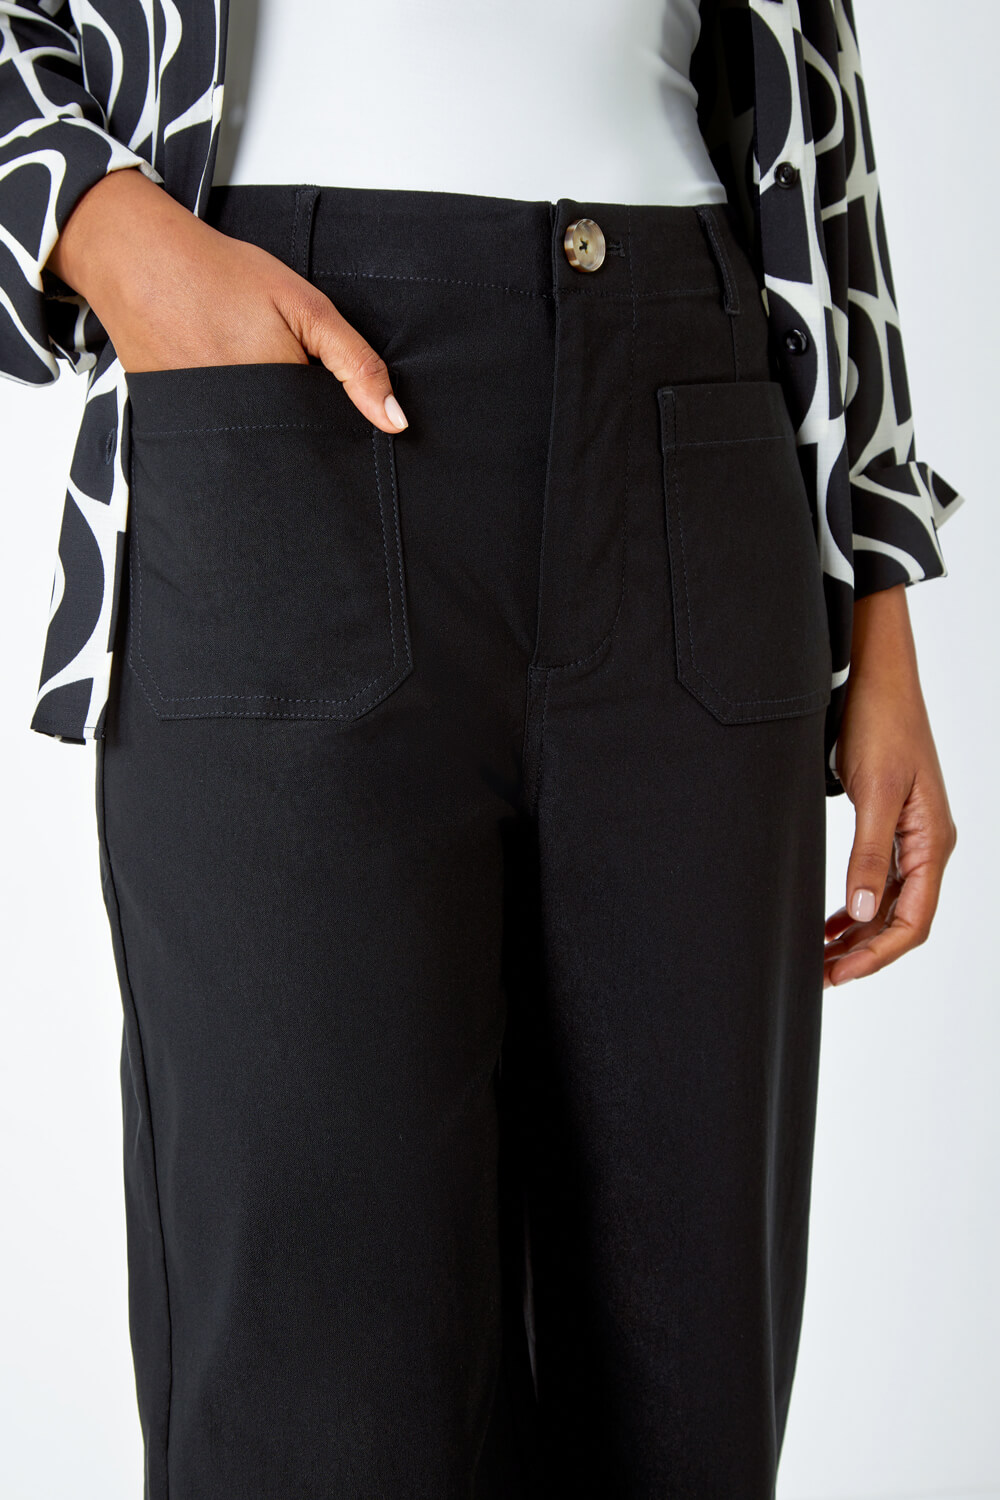 Black Pocket Detail Cropped Stretch Culottes, Image 5 of 5